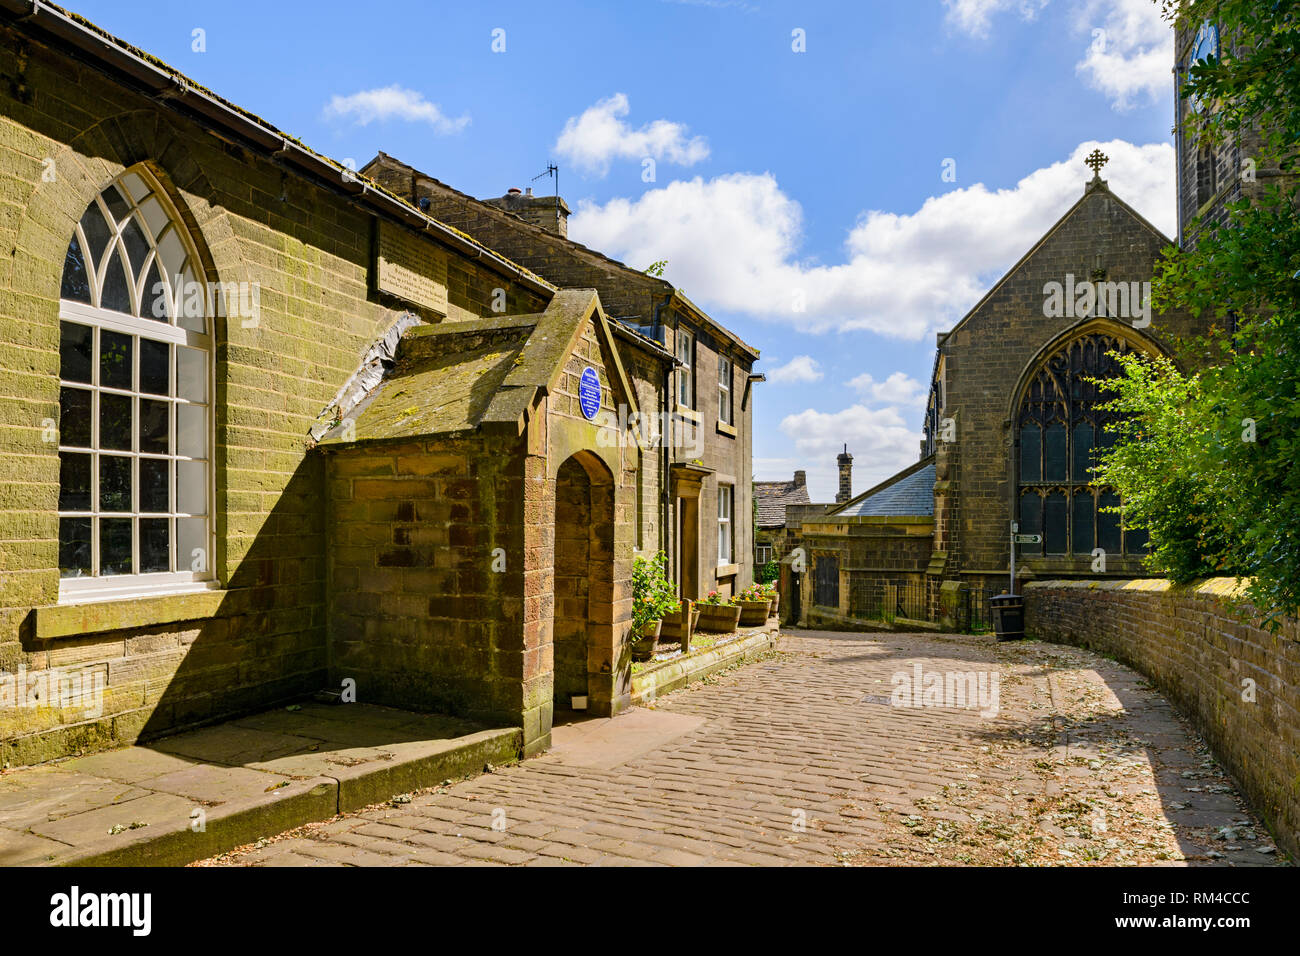 Exterior of sunlit historic Old School Room (Brontes taught here) cobbled lane & St Michael & All Angels Church - Haworth, West Yorkshire, England, UK Stock Photo